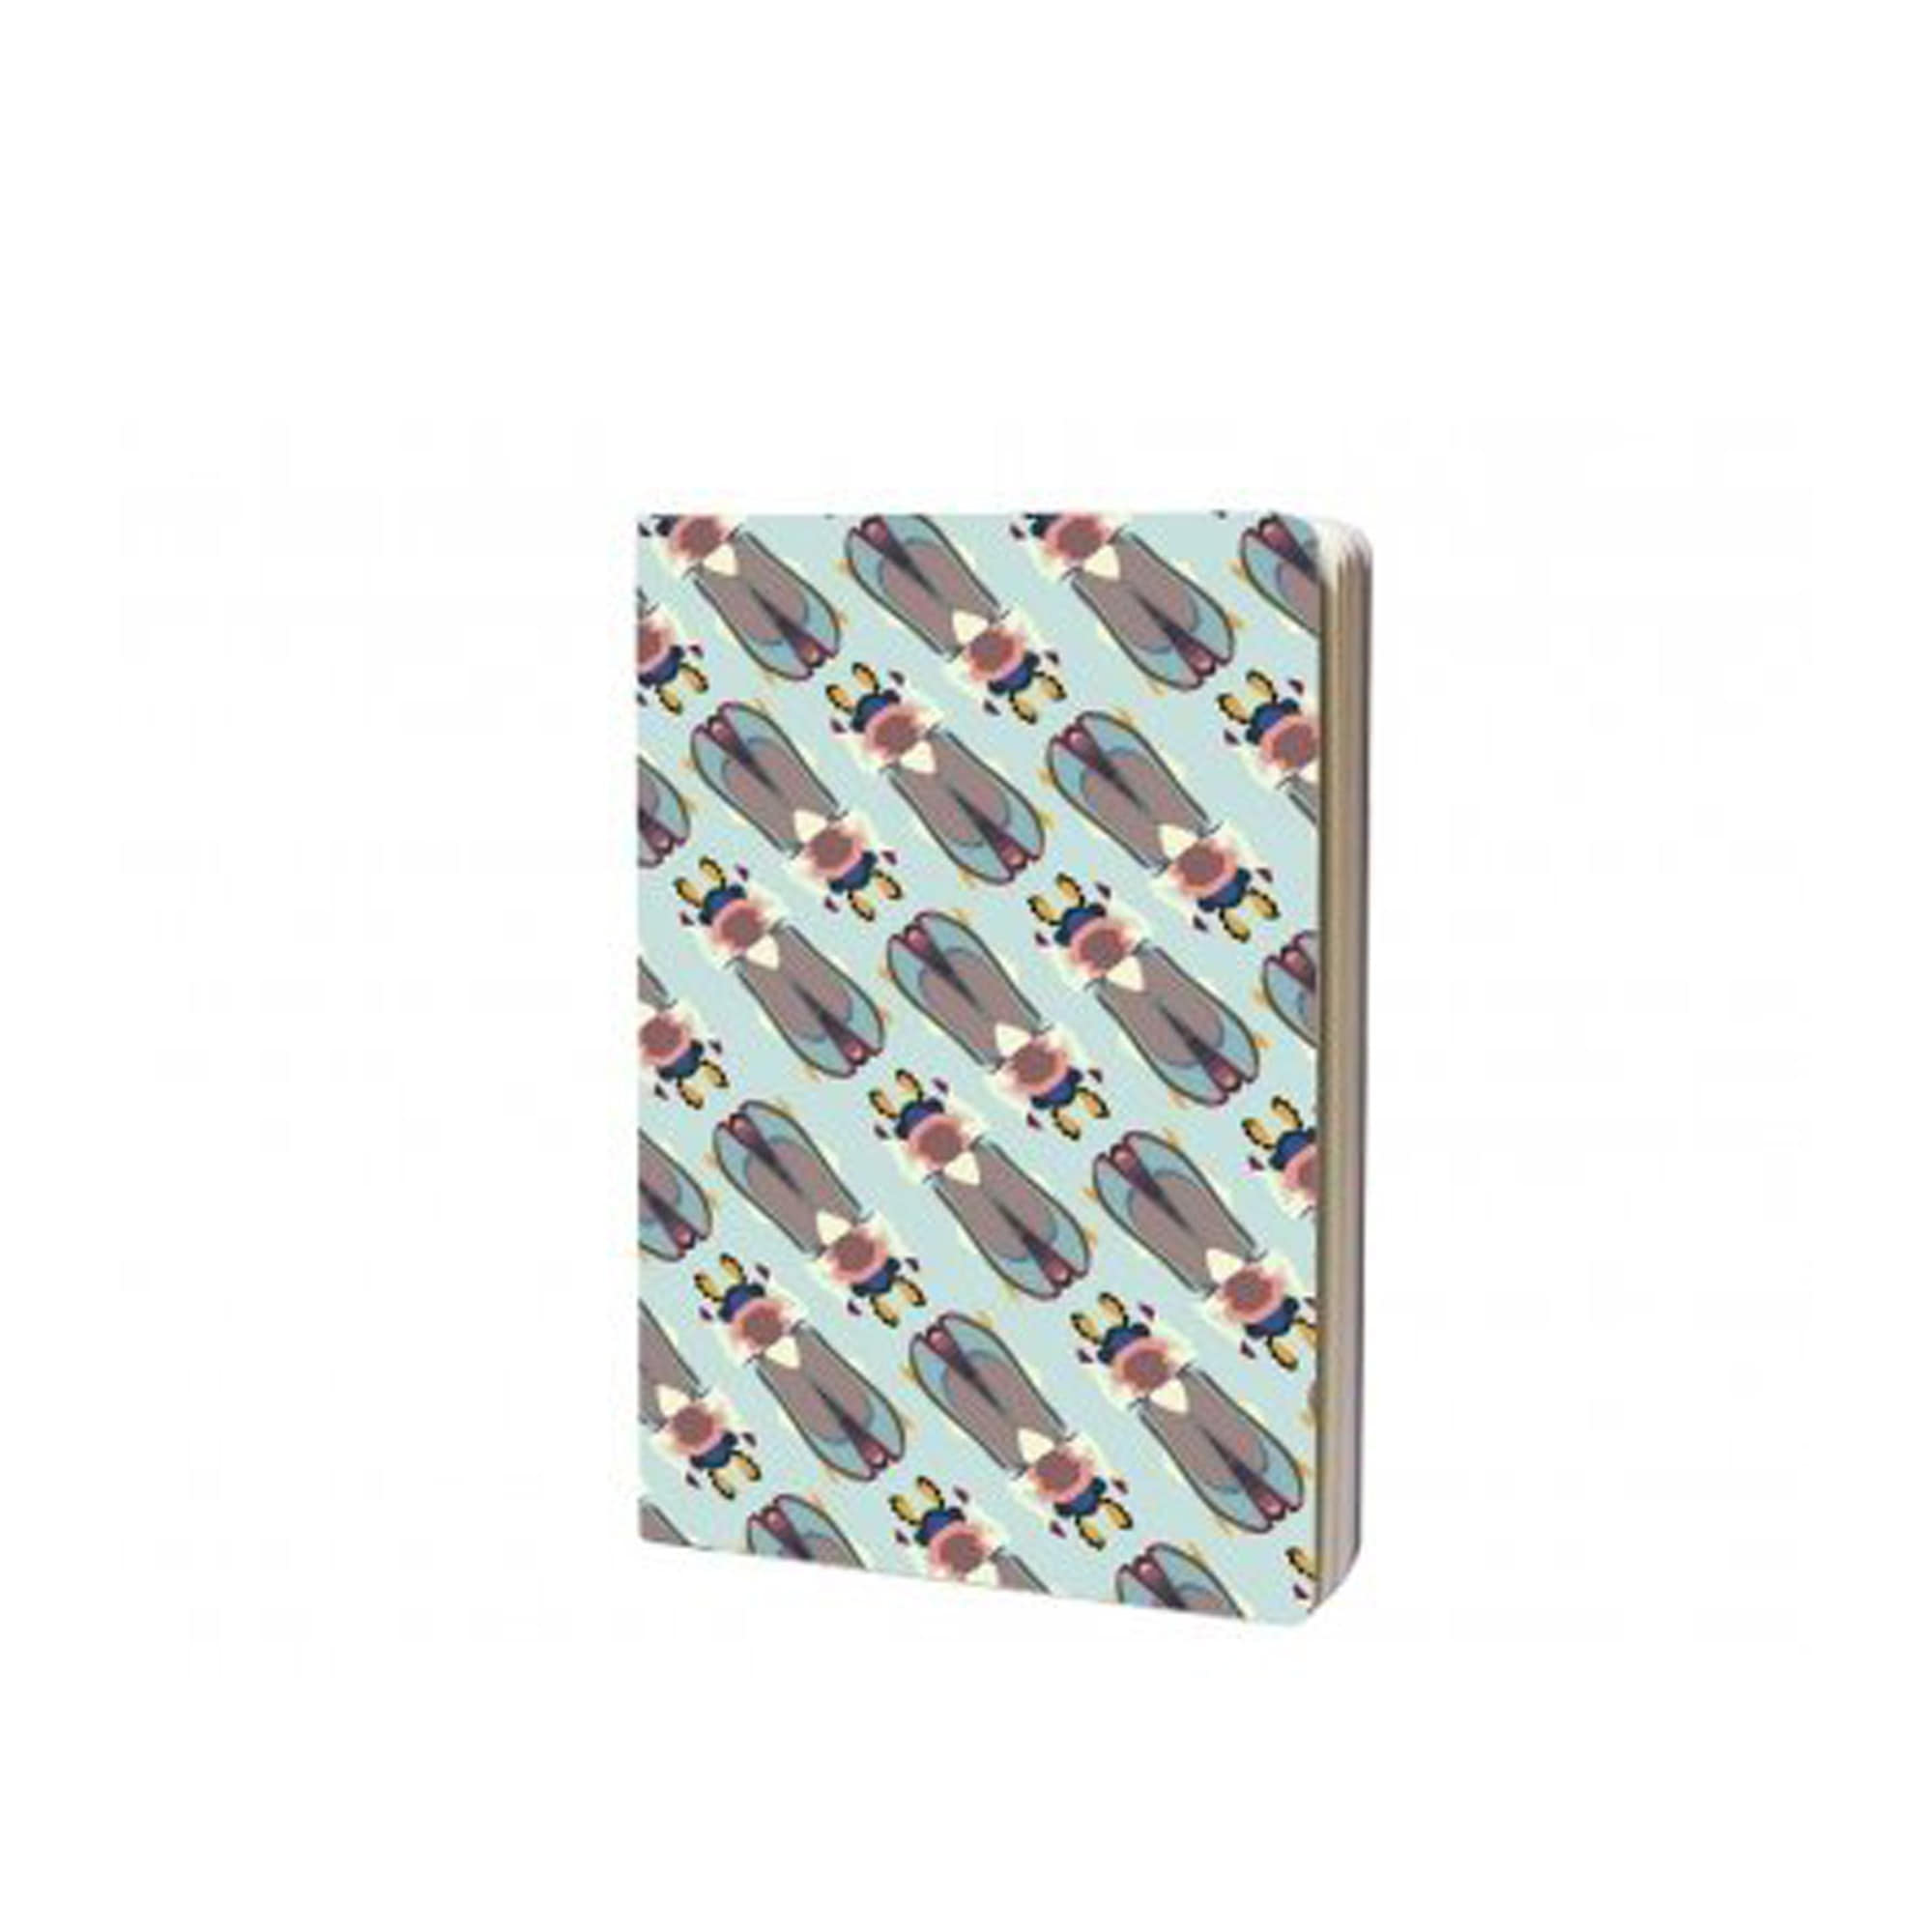 Studio Roof Notebook A6 - Tiger Beetle